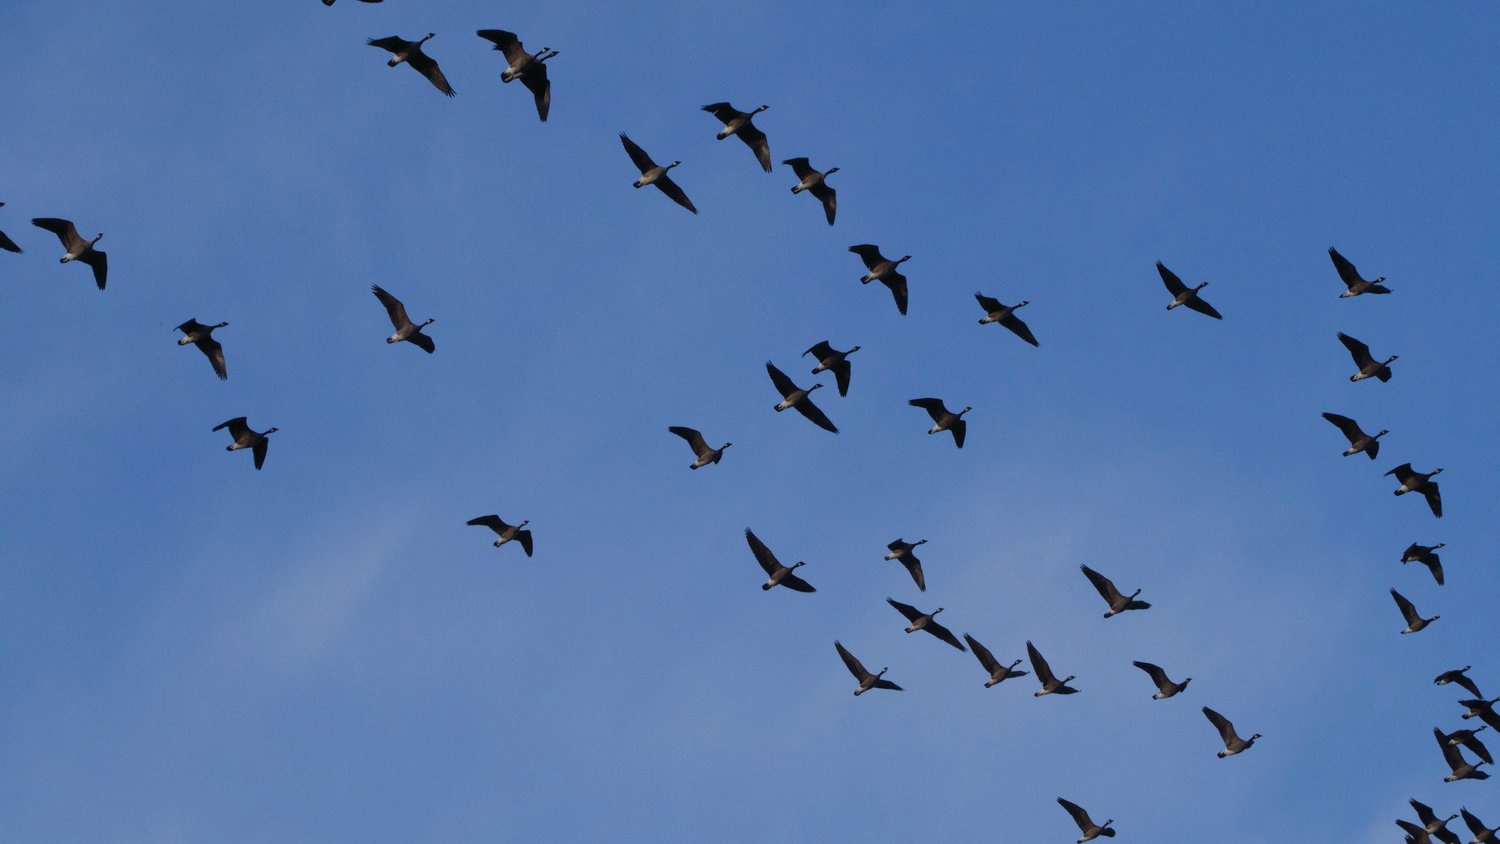 Honking helps this large flock of Canada Geese stay together.